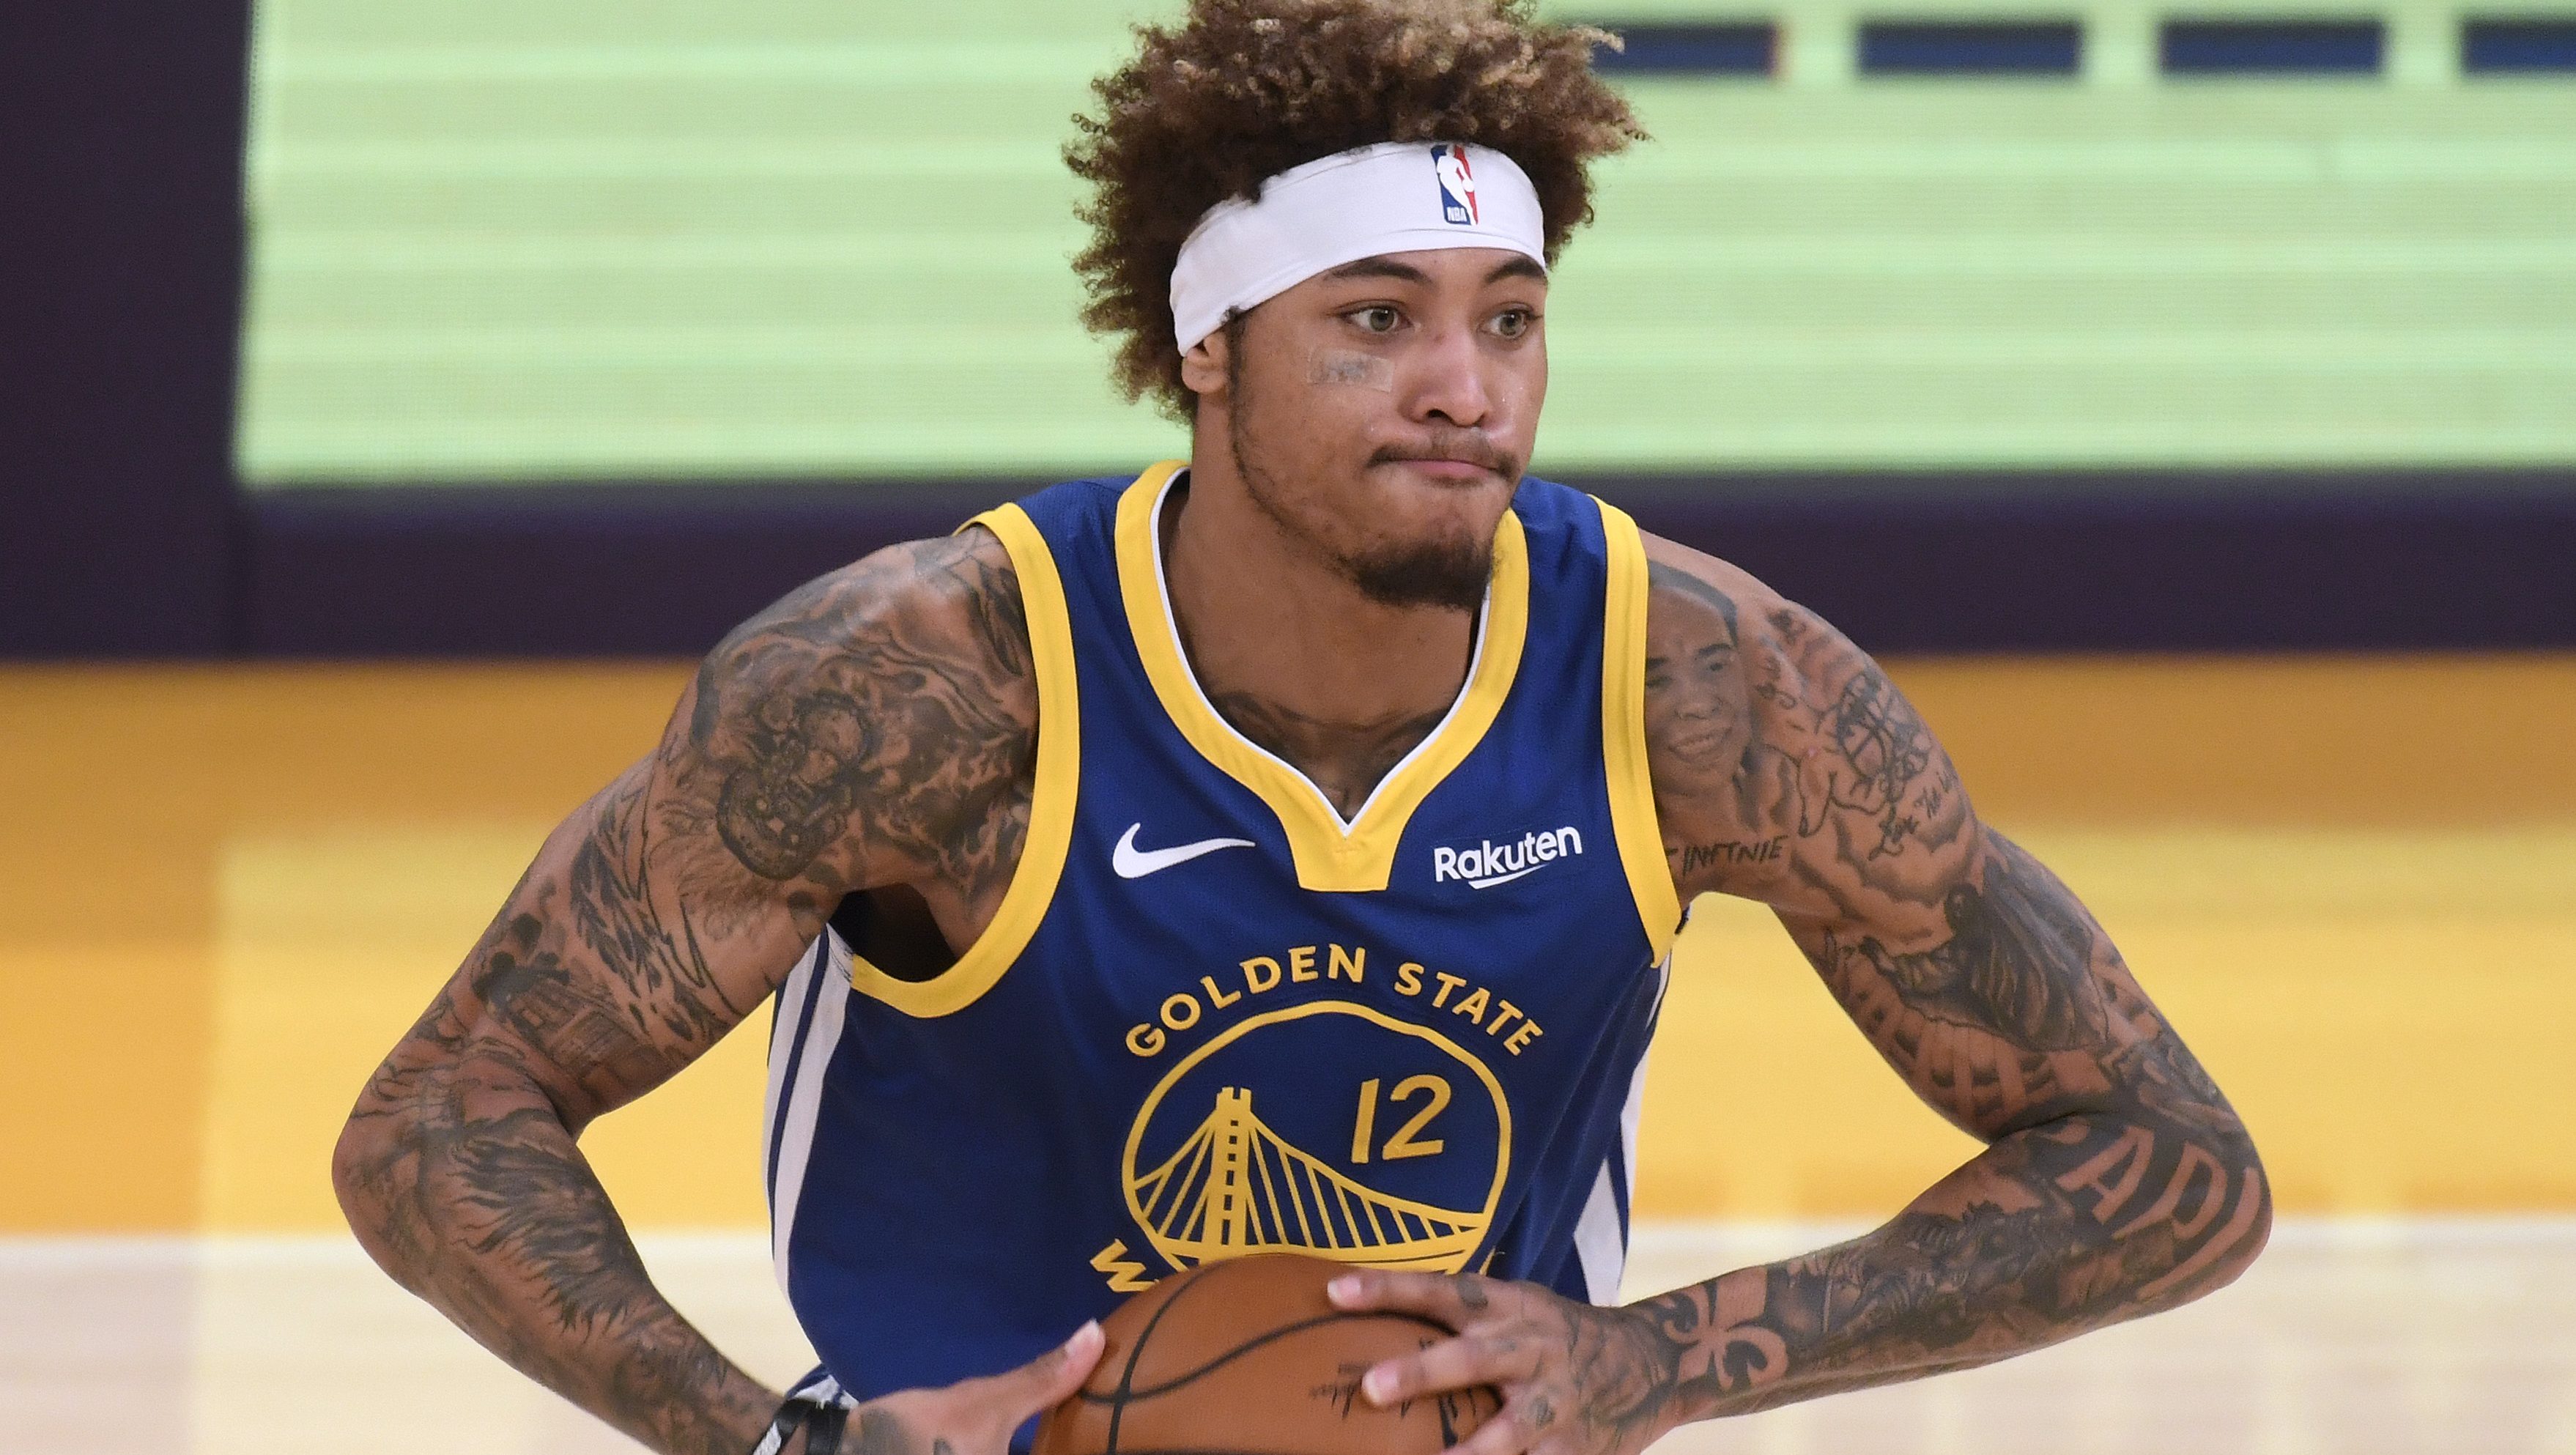 Golden State Warriors: Kelly Oubre has been shooting better than Curry